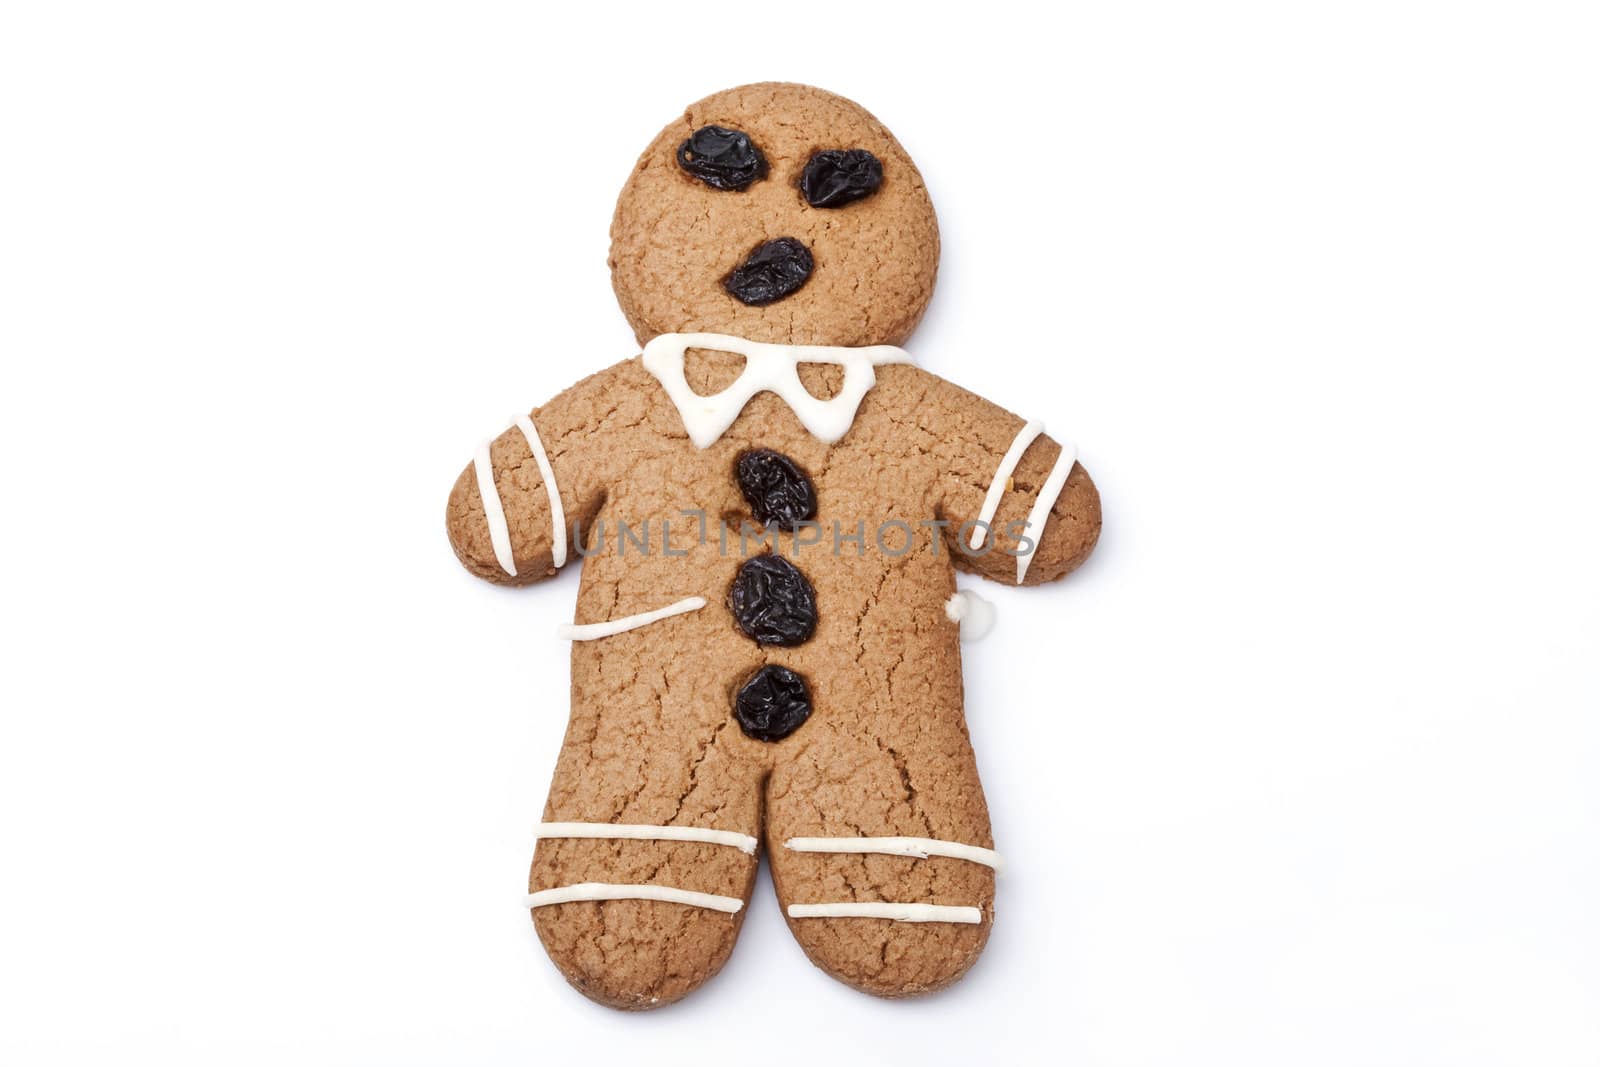 Gingerbread man on white background.